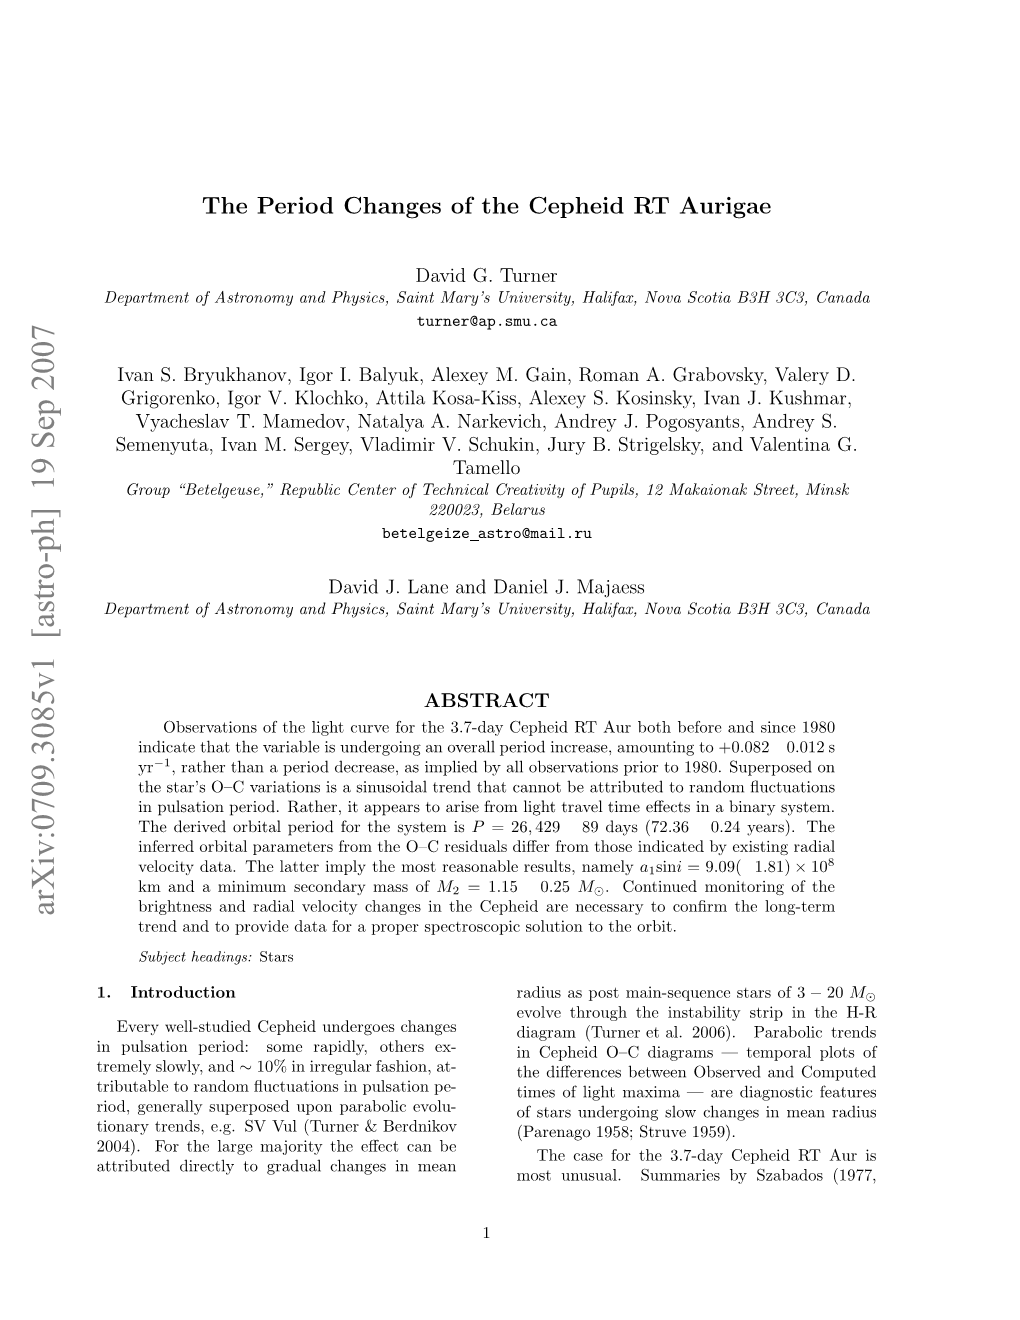 The Period Changes of the Cepheid RT Aurigae